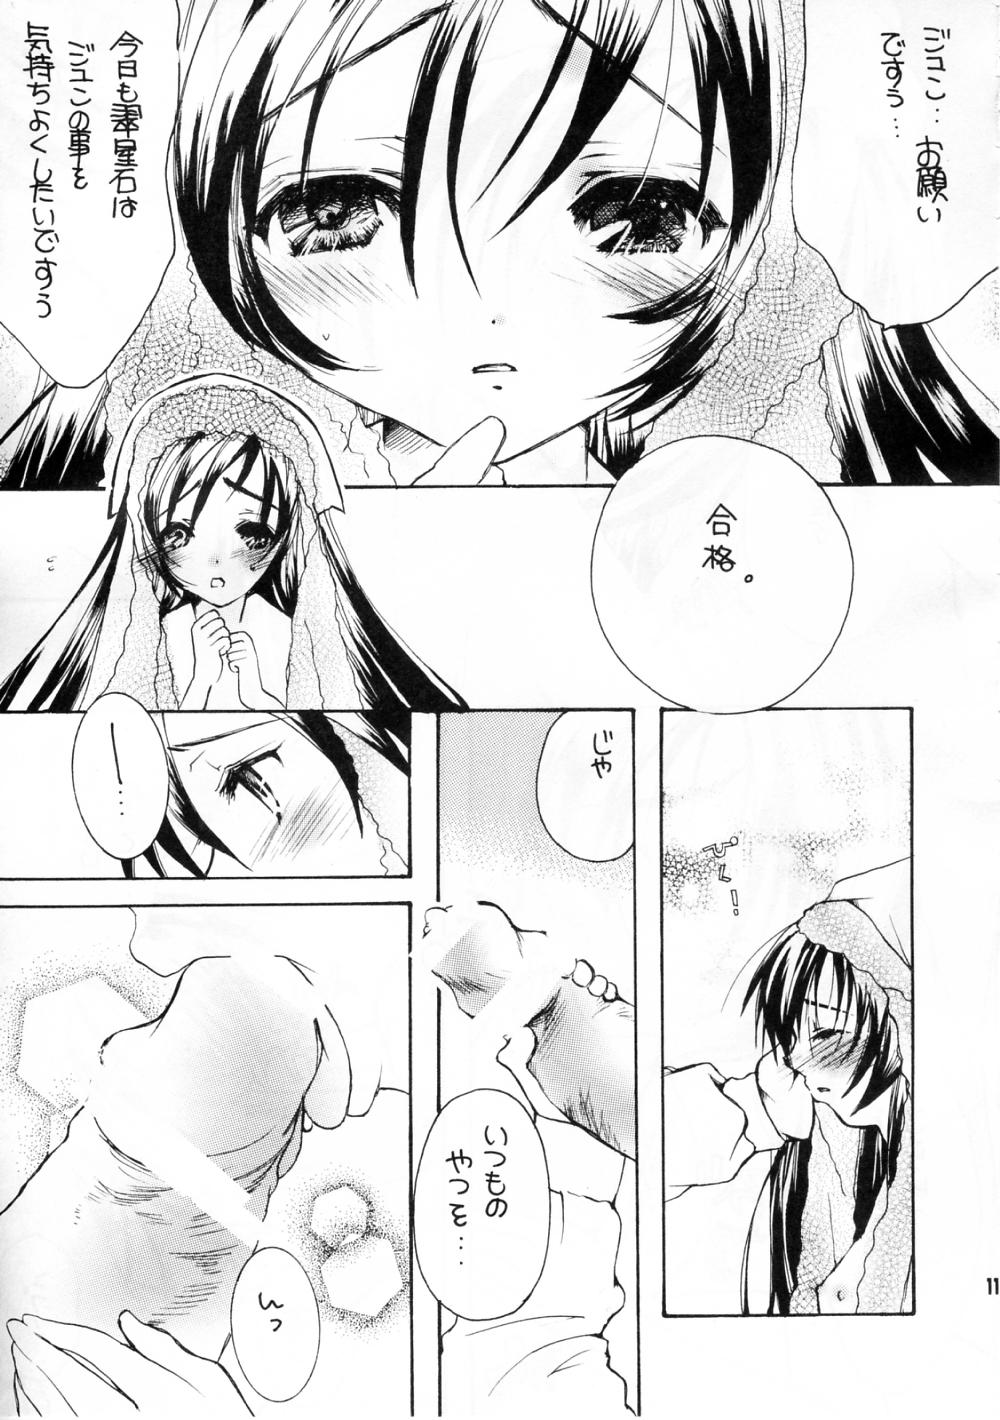 Muscles TWIST ROSES - Rozen maiden Gaygroupsex - Page 10